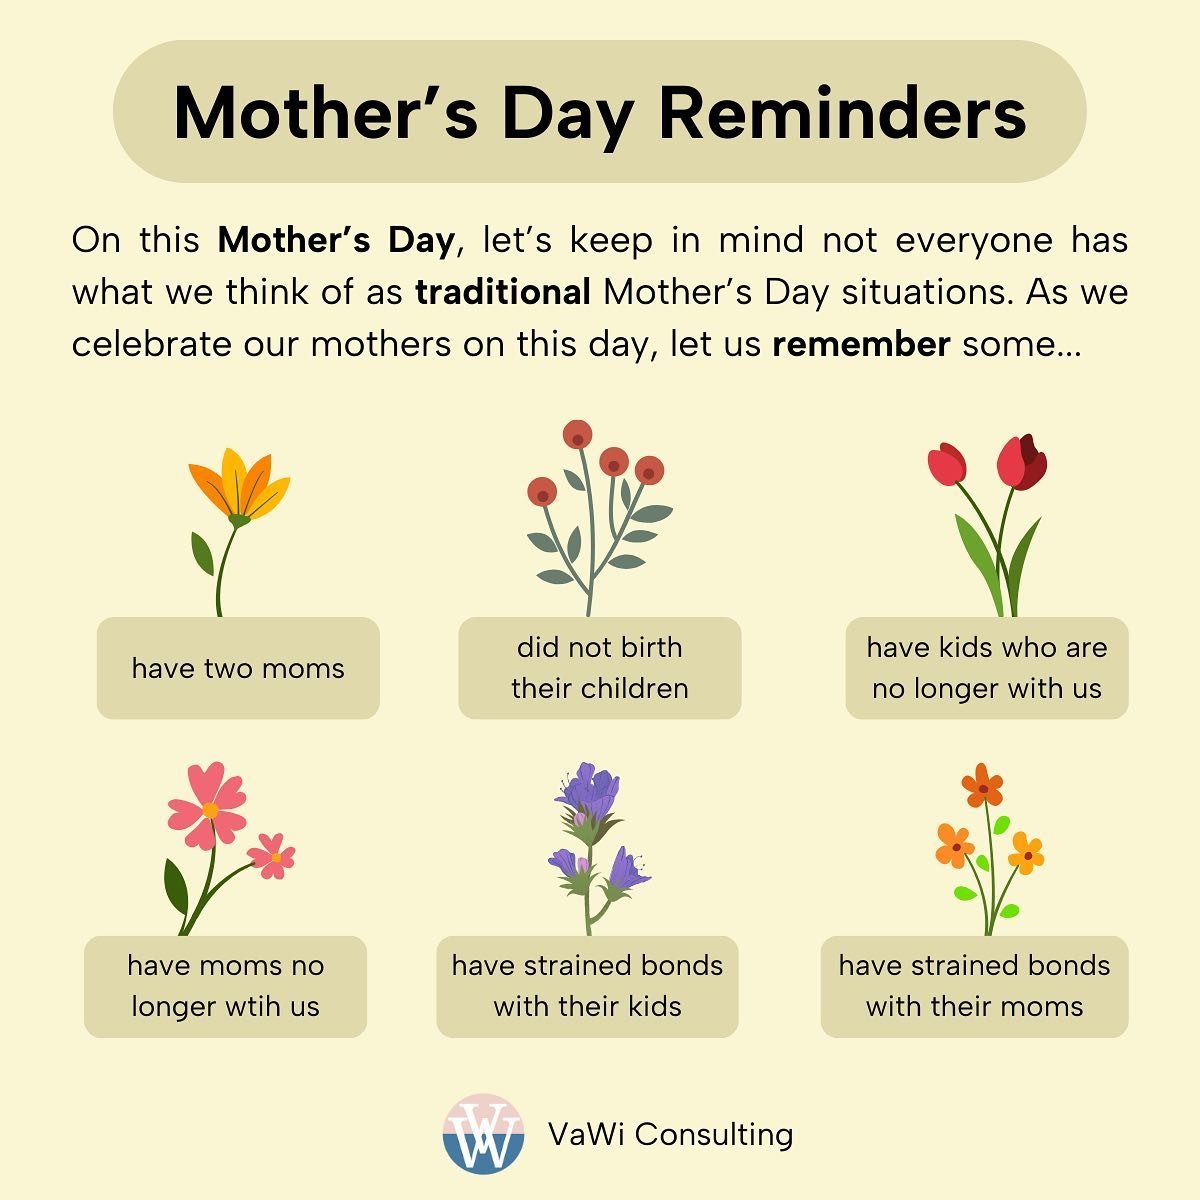 As we approach Mother&rsquo;s Day this weekend, let us be mindful of the ways others observe this holiday outside of our traditional idea of this day.

Let us remember that some people have two moms, some did not birth their children, some might be m